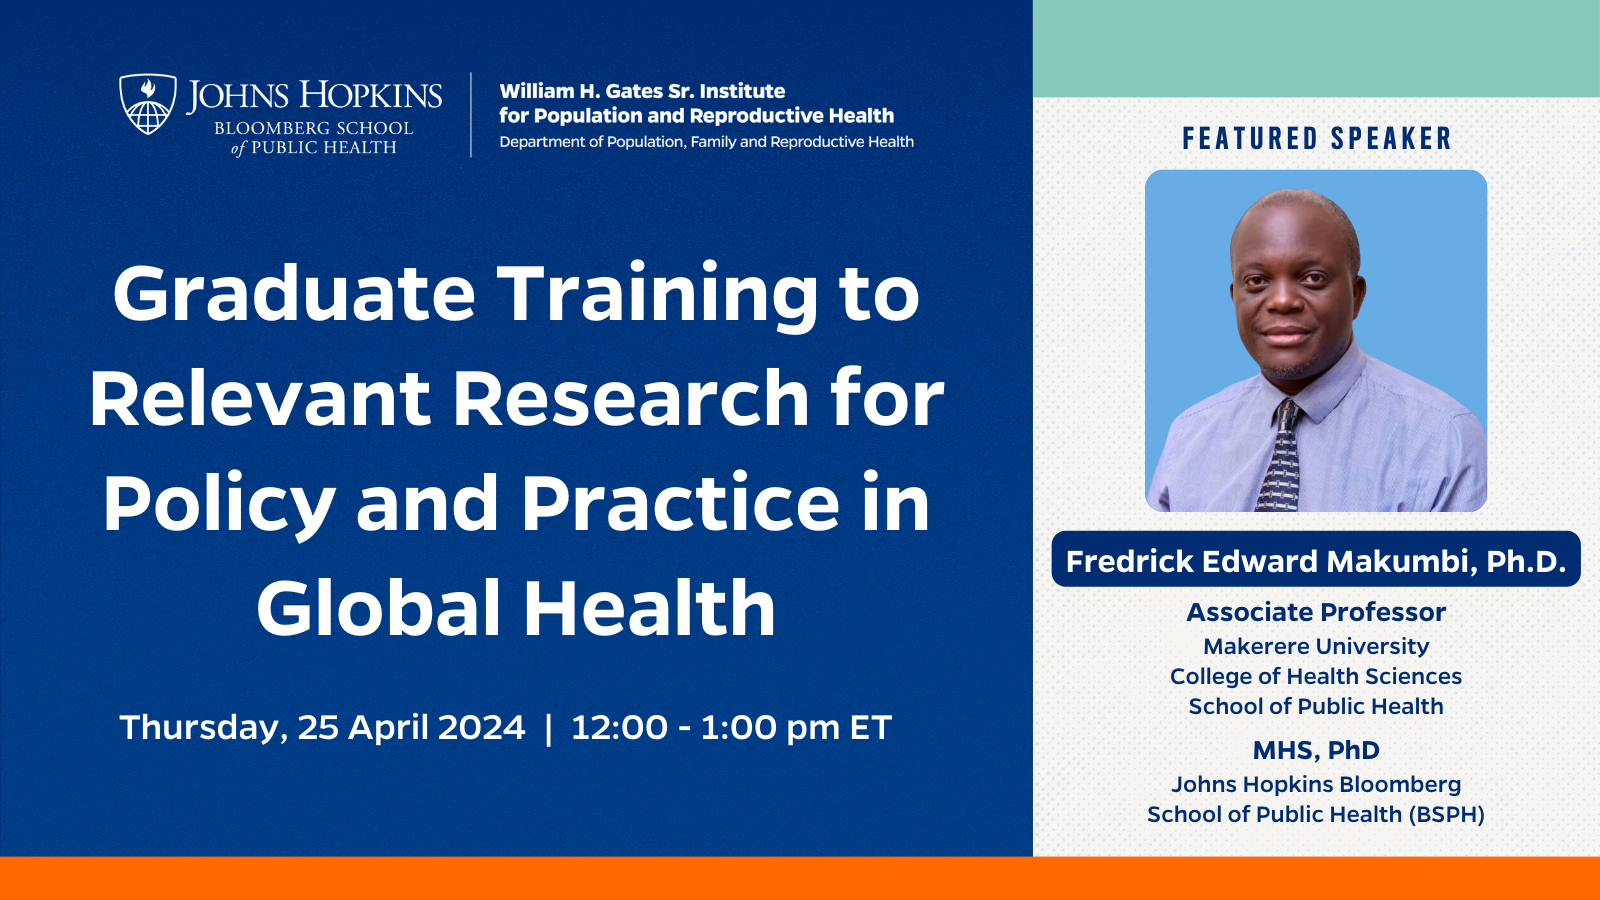 Watch Now: Graduate Training to Relevant Research for Policy and Practice in Global Health